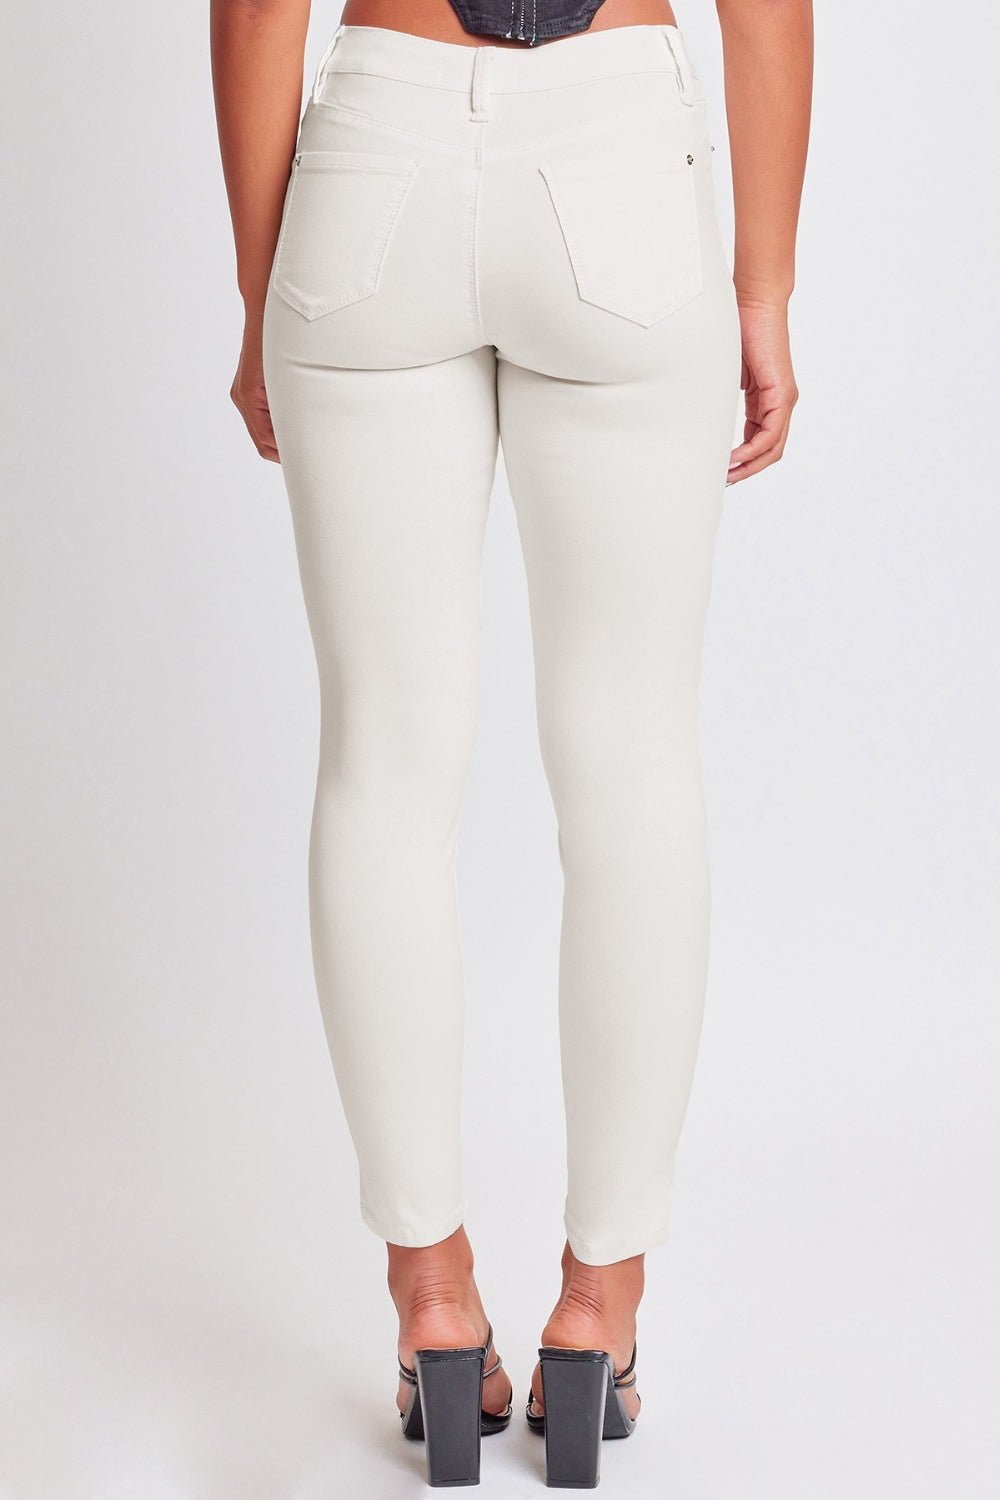 Hyperstretch Mid-Rise Skinny Jeans in Vanilla CreamJeansYMI Jeanswear